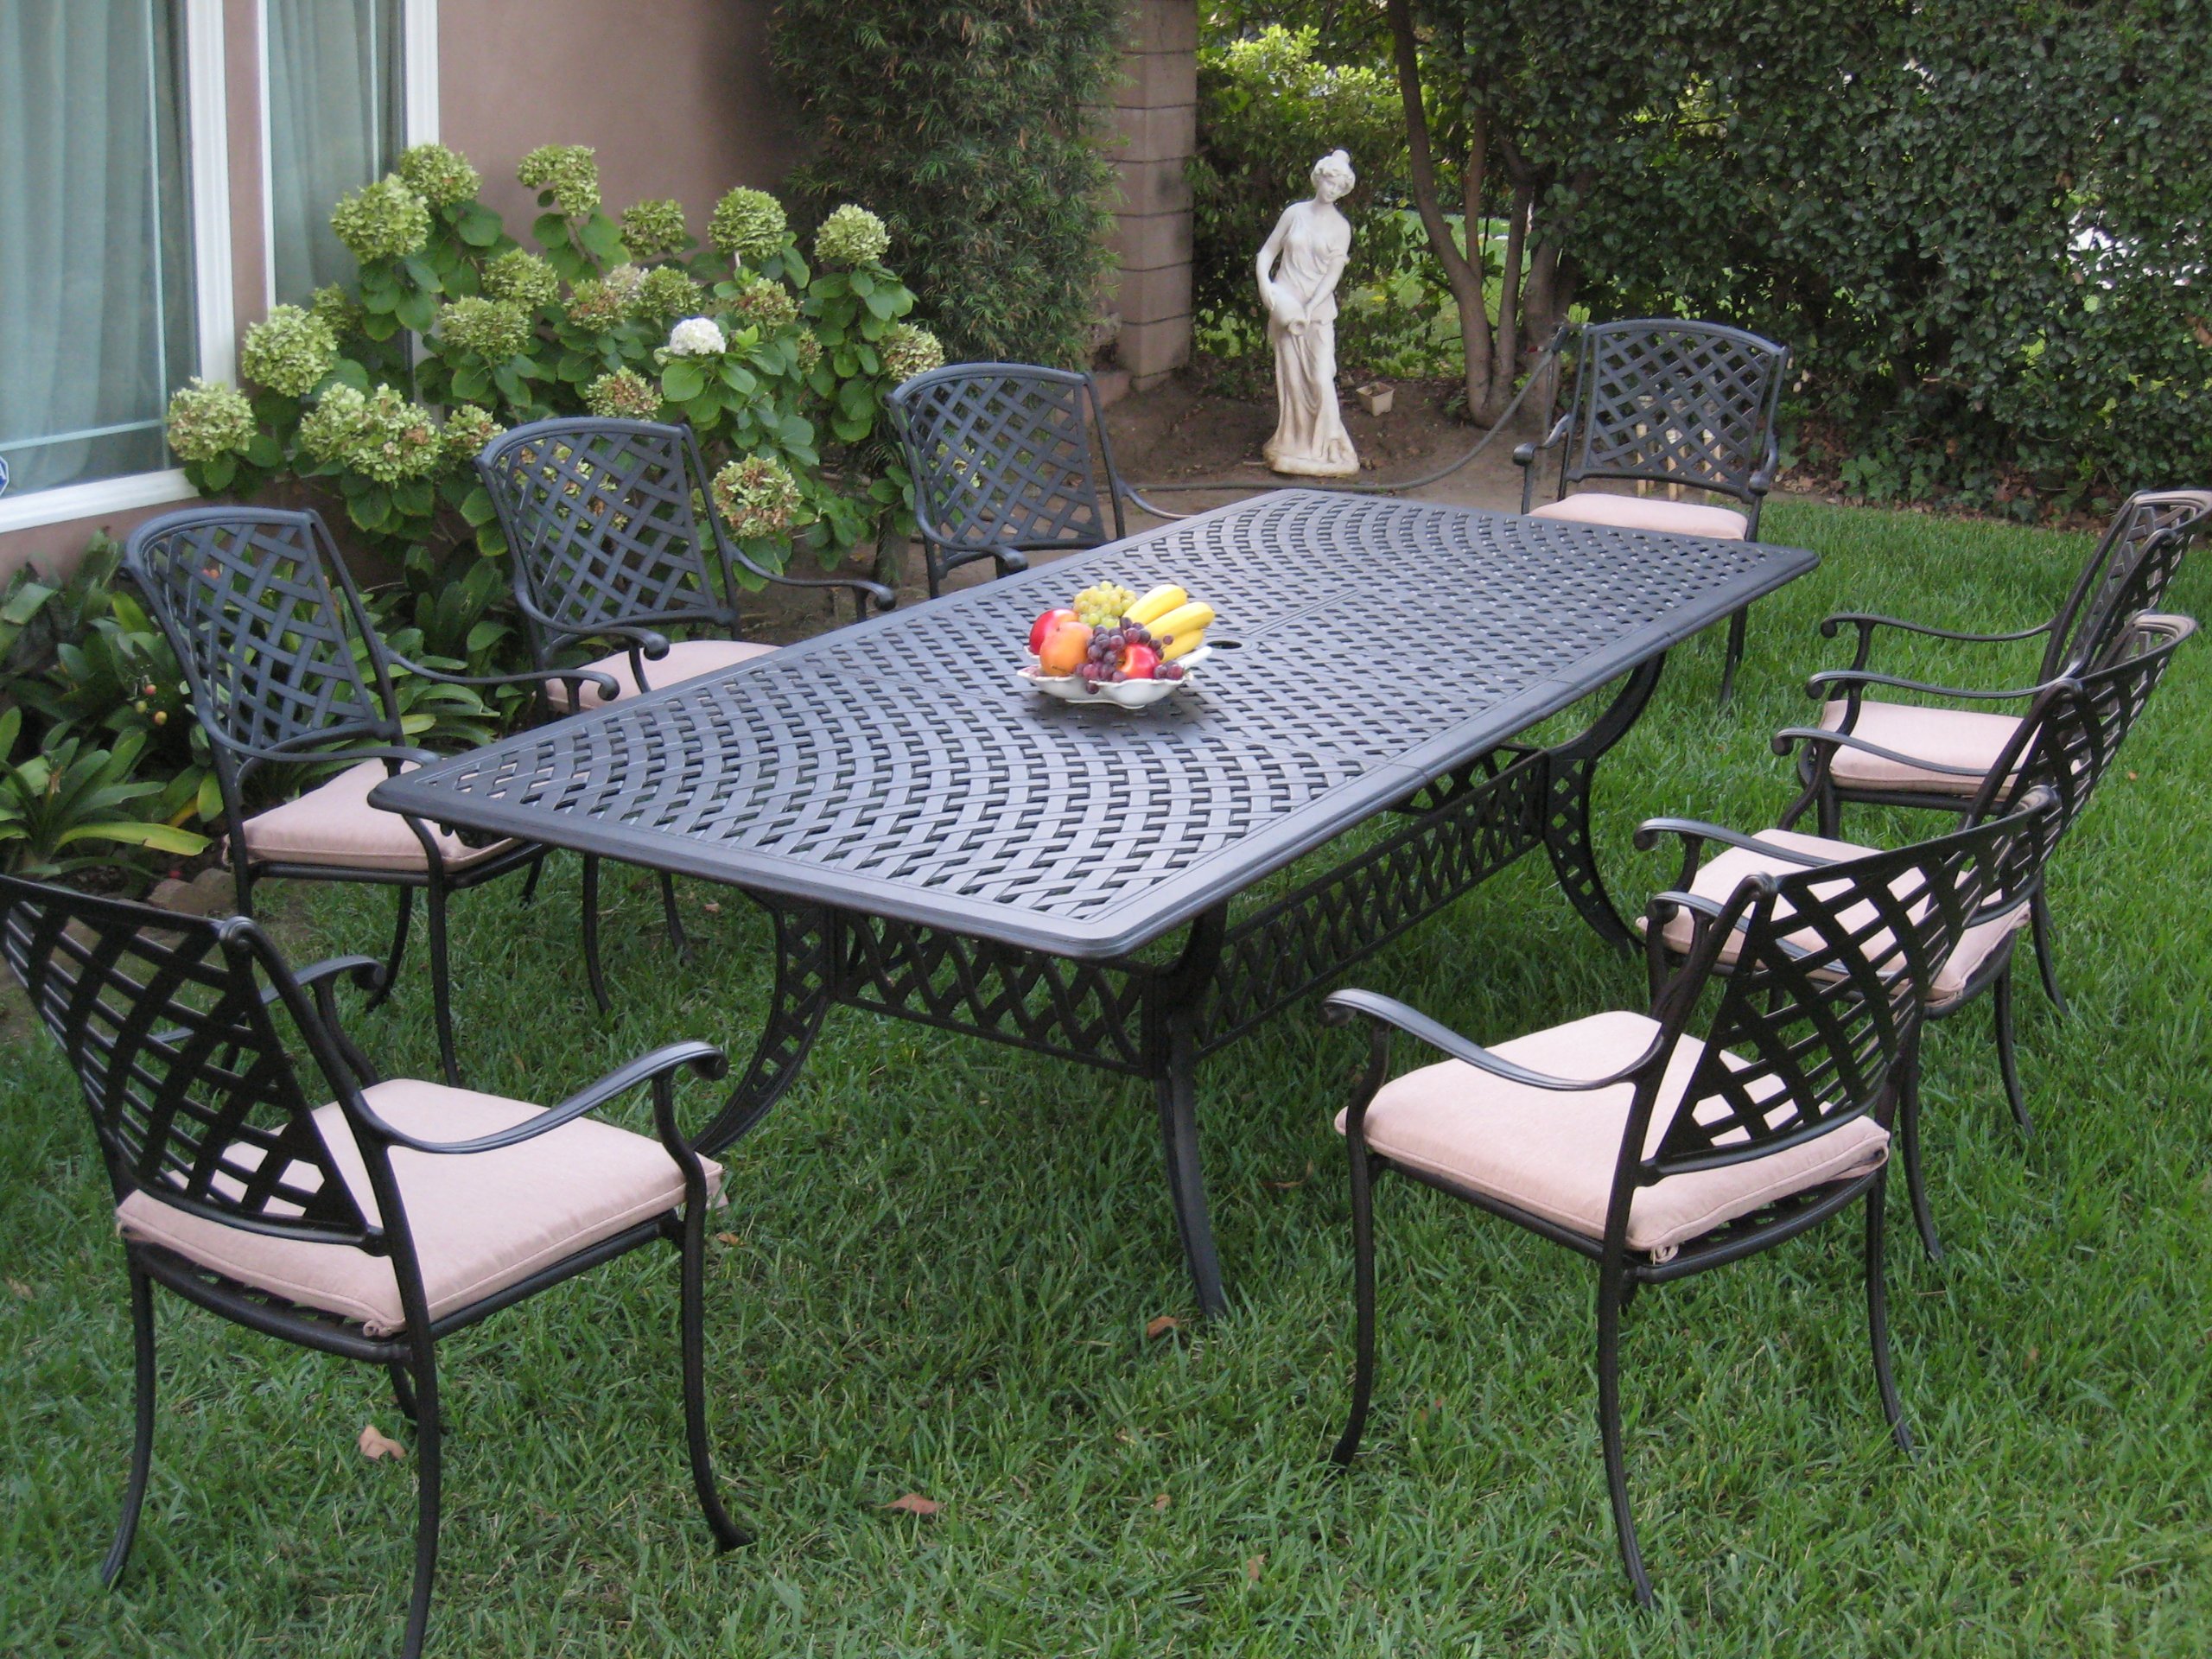 Aluminum Sling Patio Furniture. Comfortable Seating for Outdoor Settings